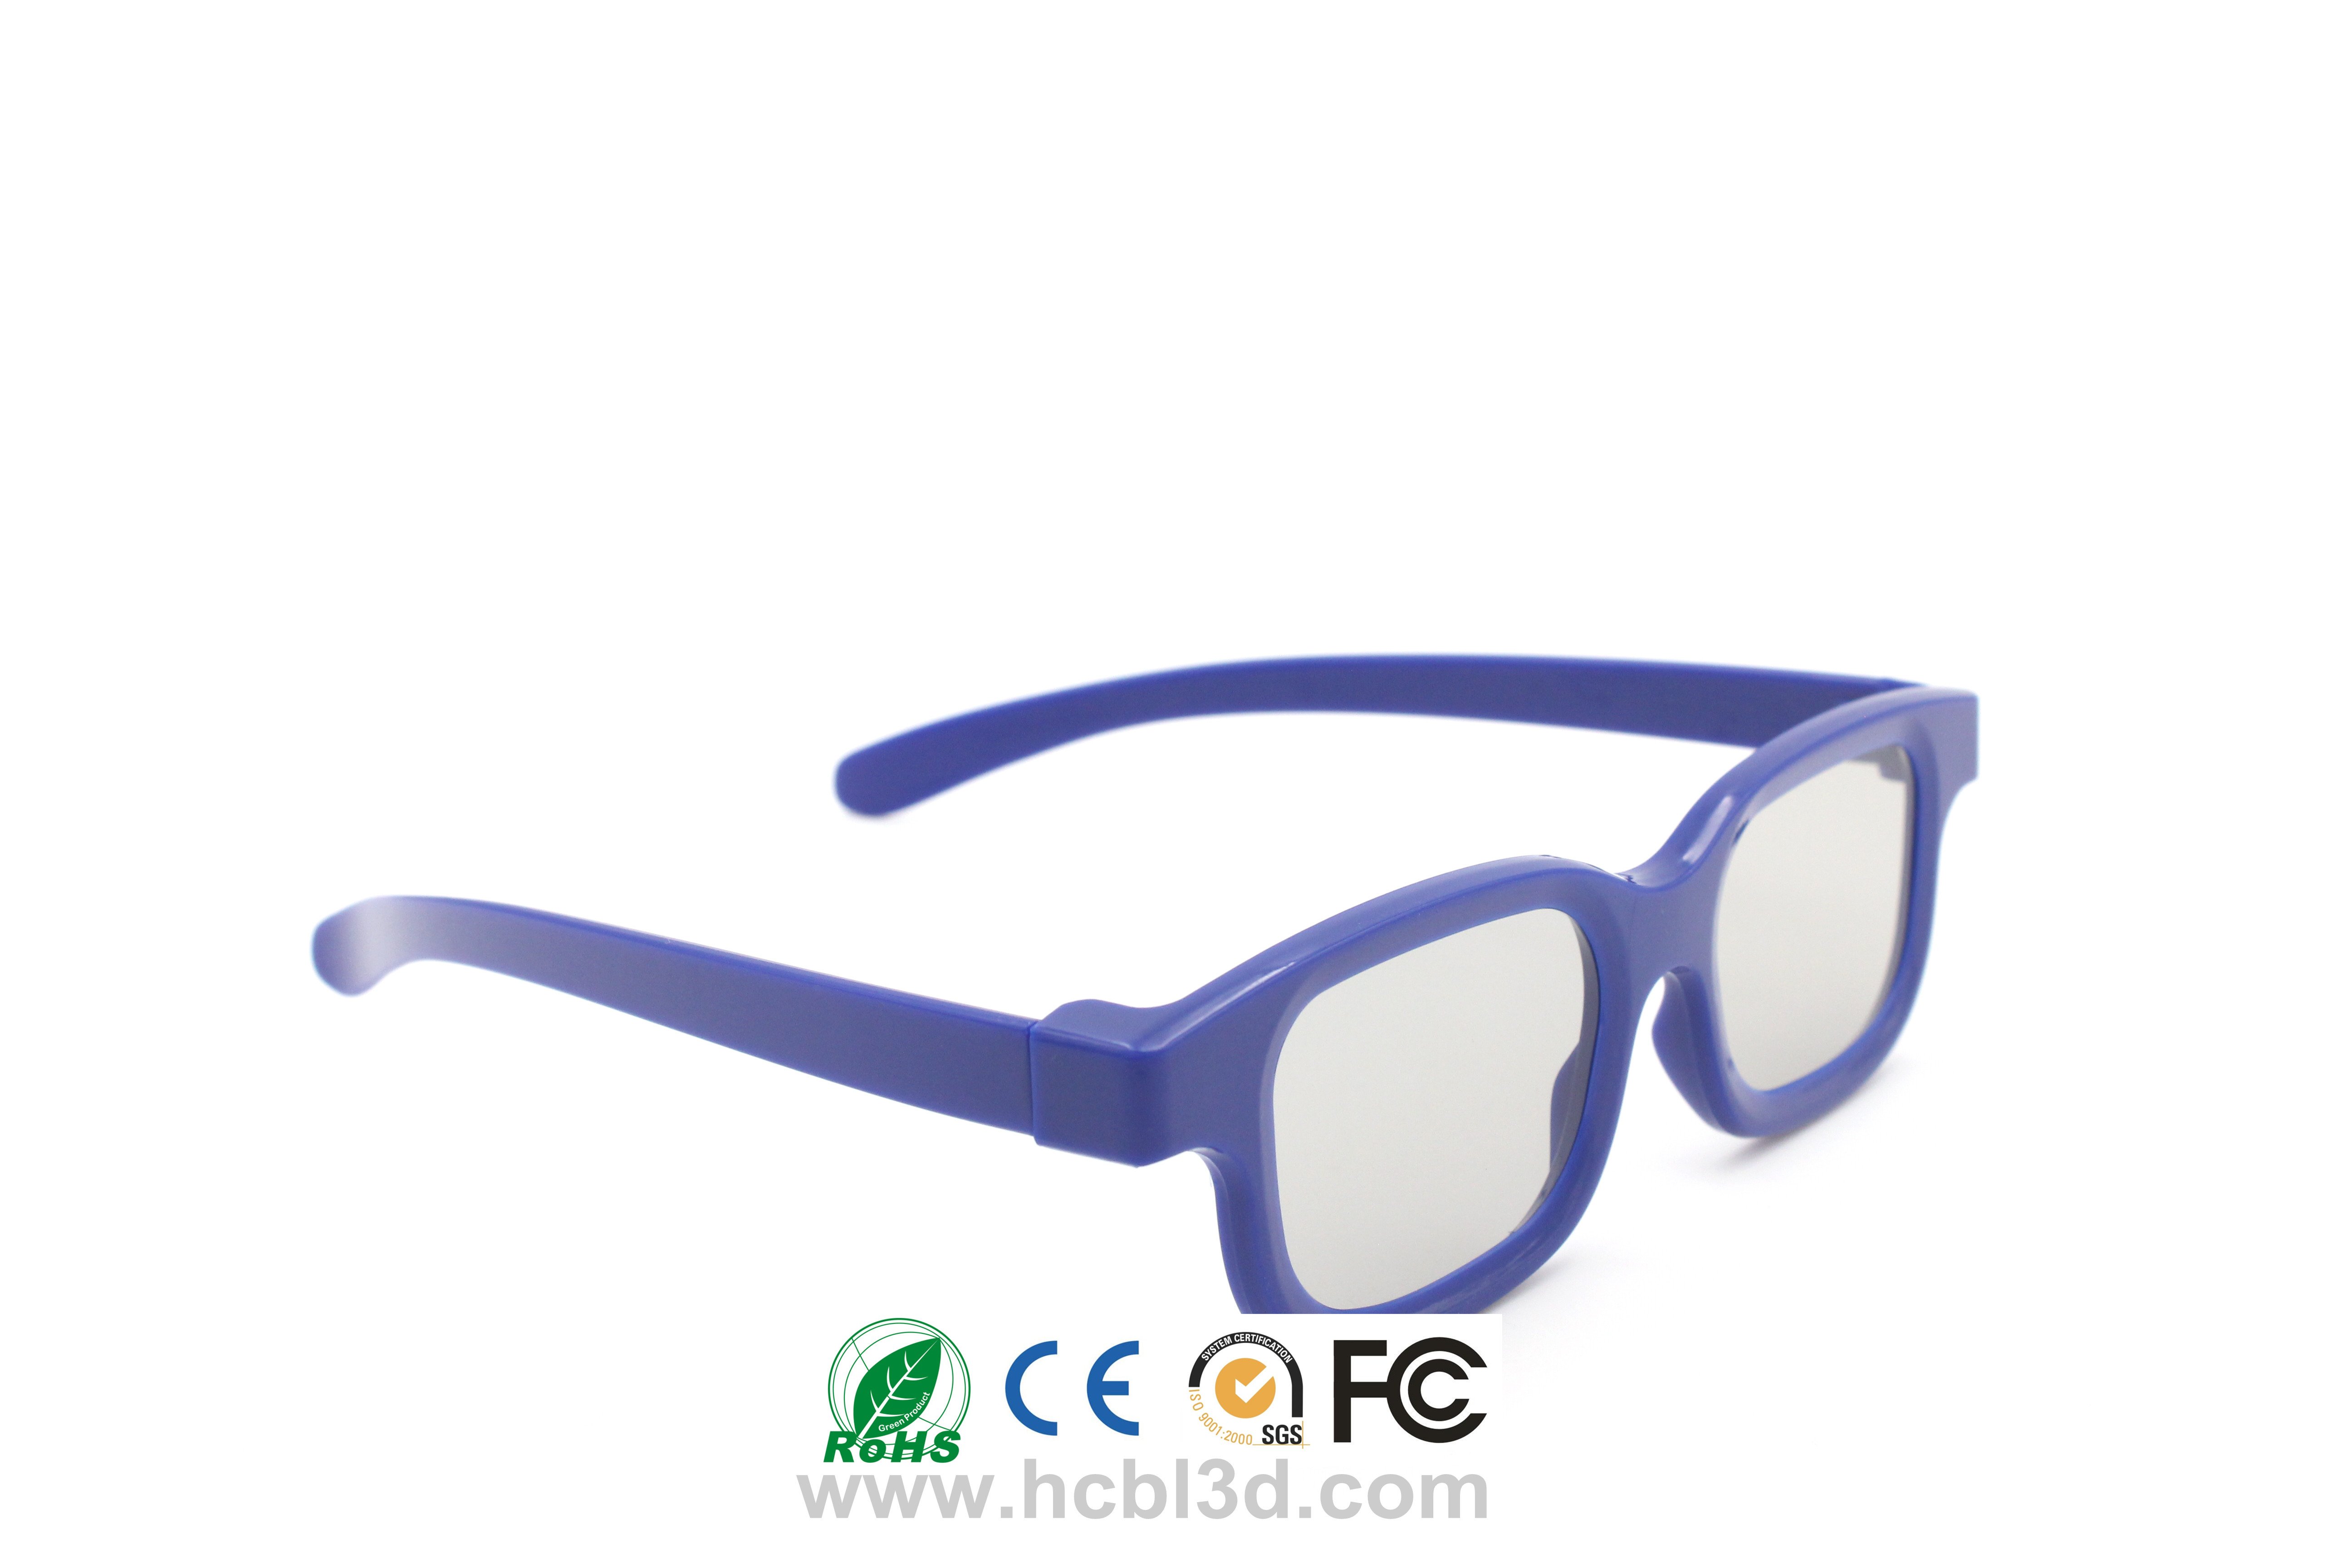 Universal Passive Cinema 3D Glasses With High Quality Polarized Lens for best 3D experience